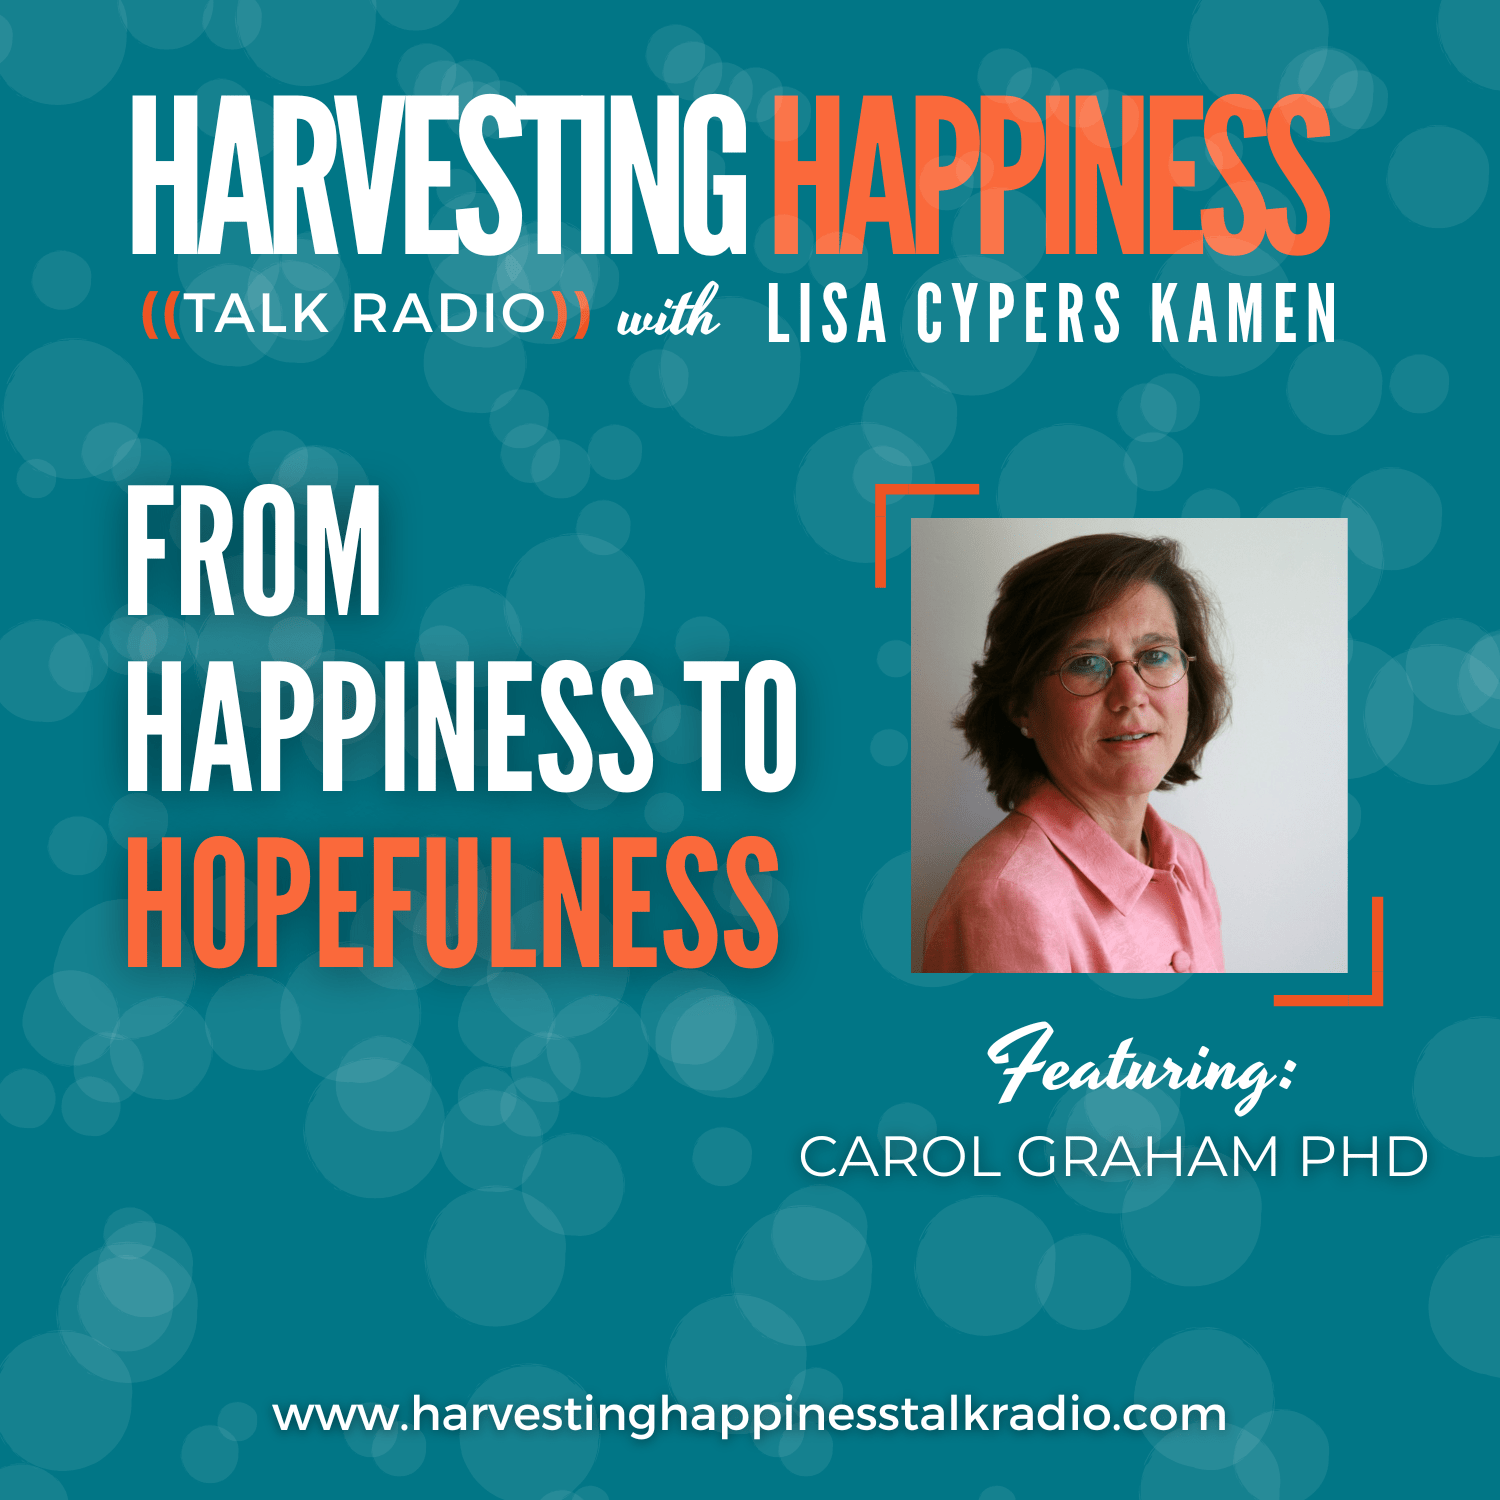 Podcast about happiness and hopefulness with carol graham and Lisa Cypers Kamen